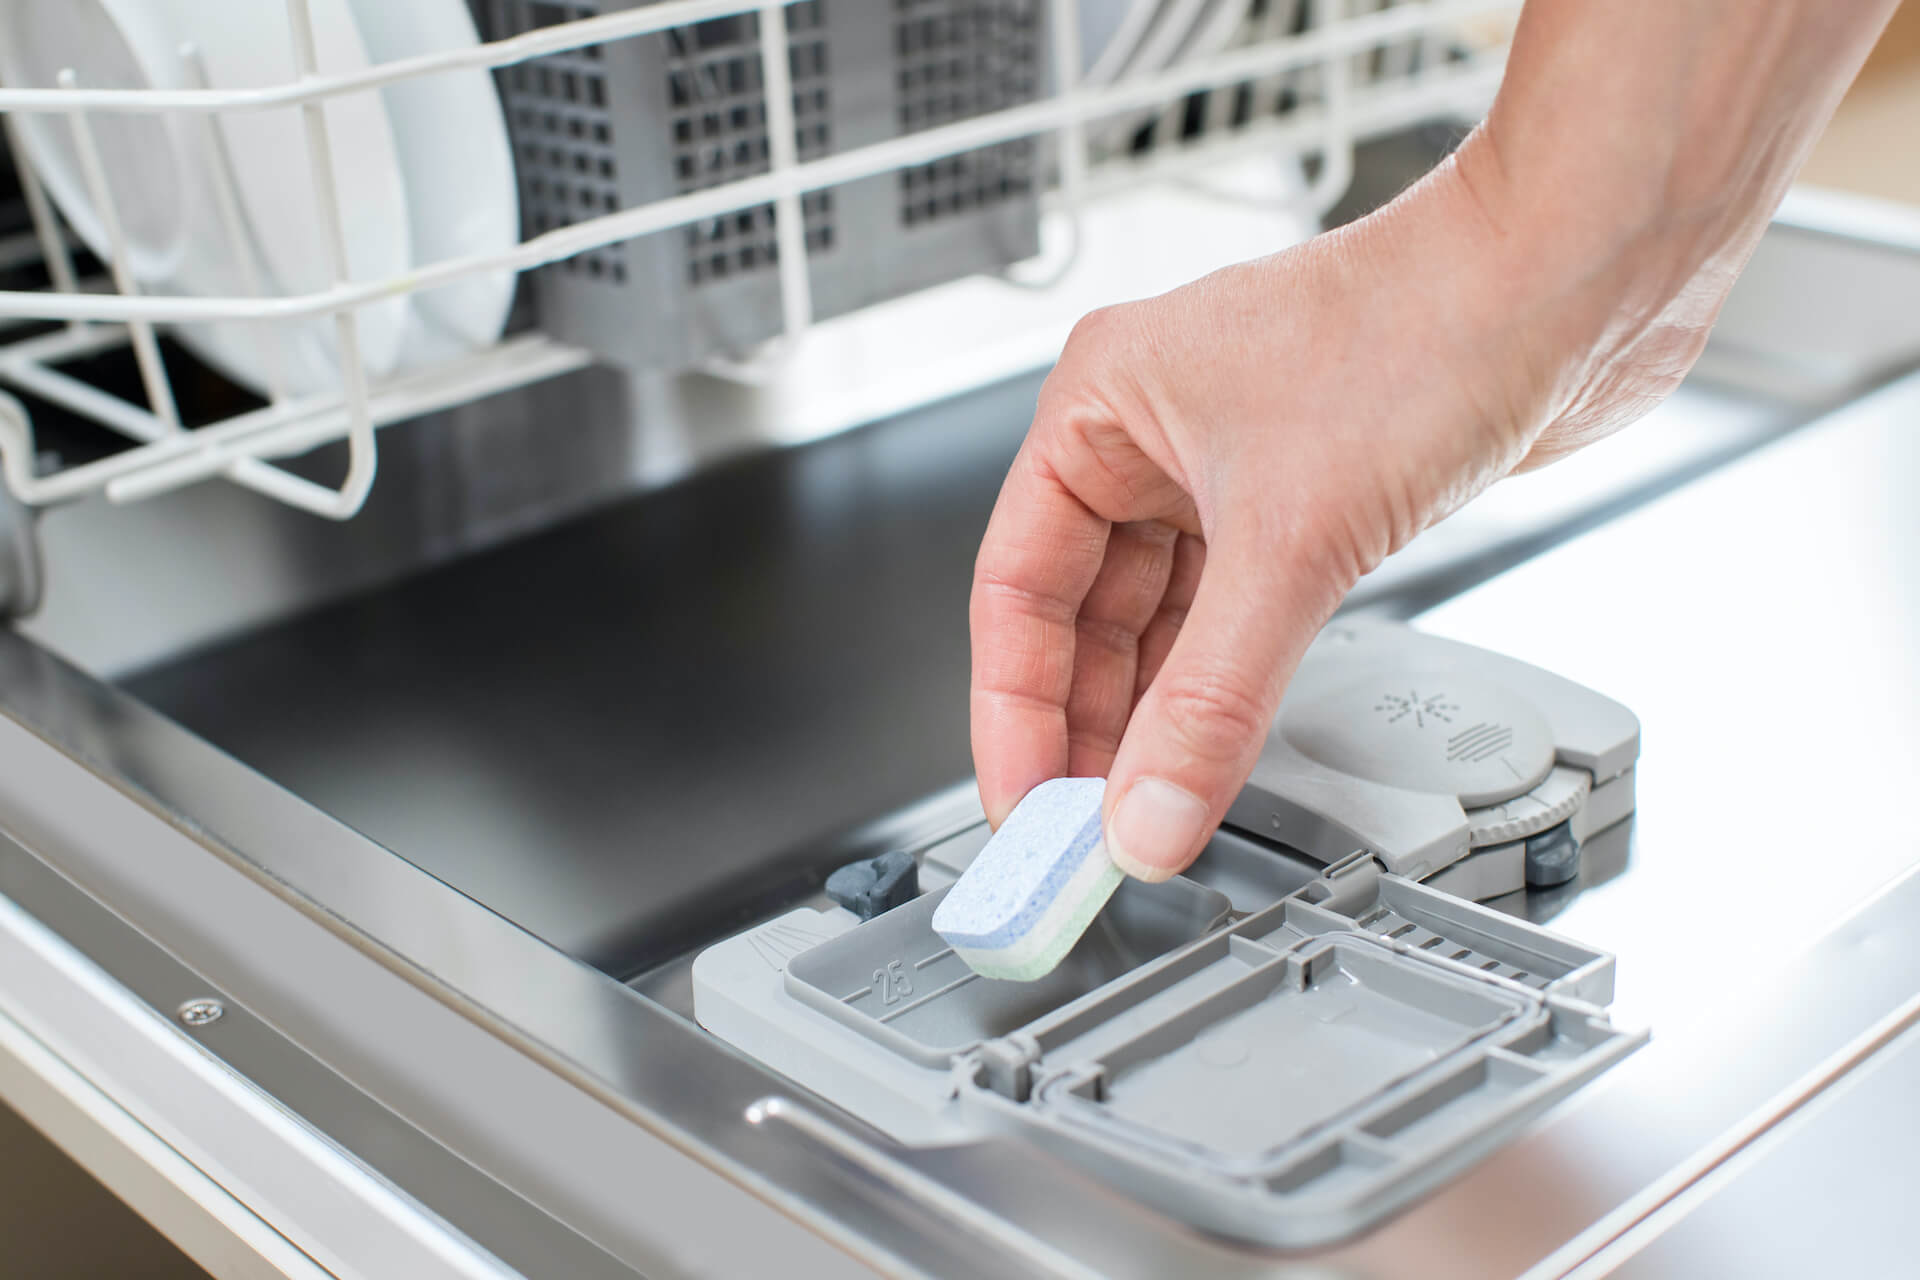 How To Use The Dishwasher